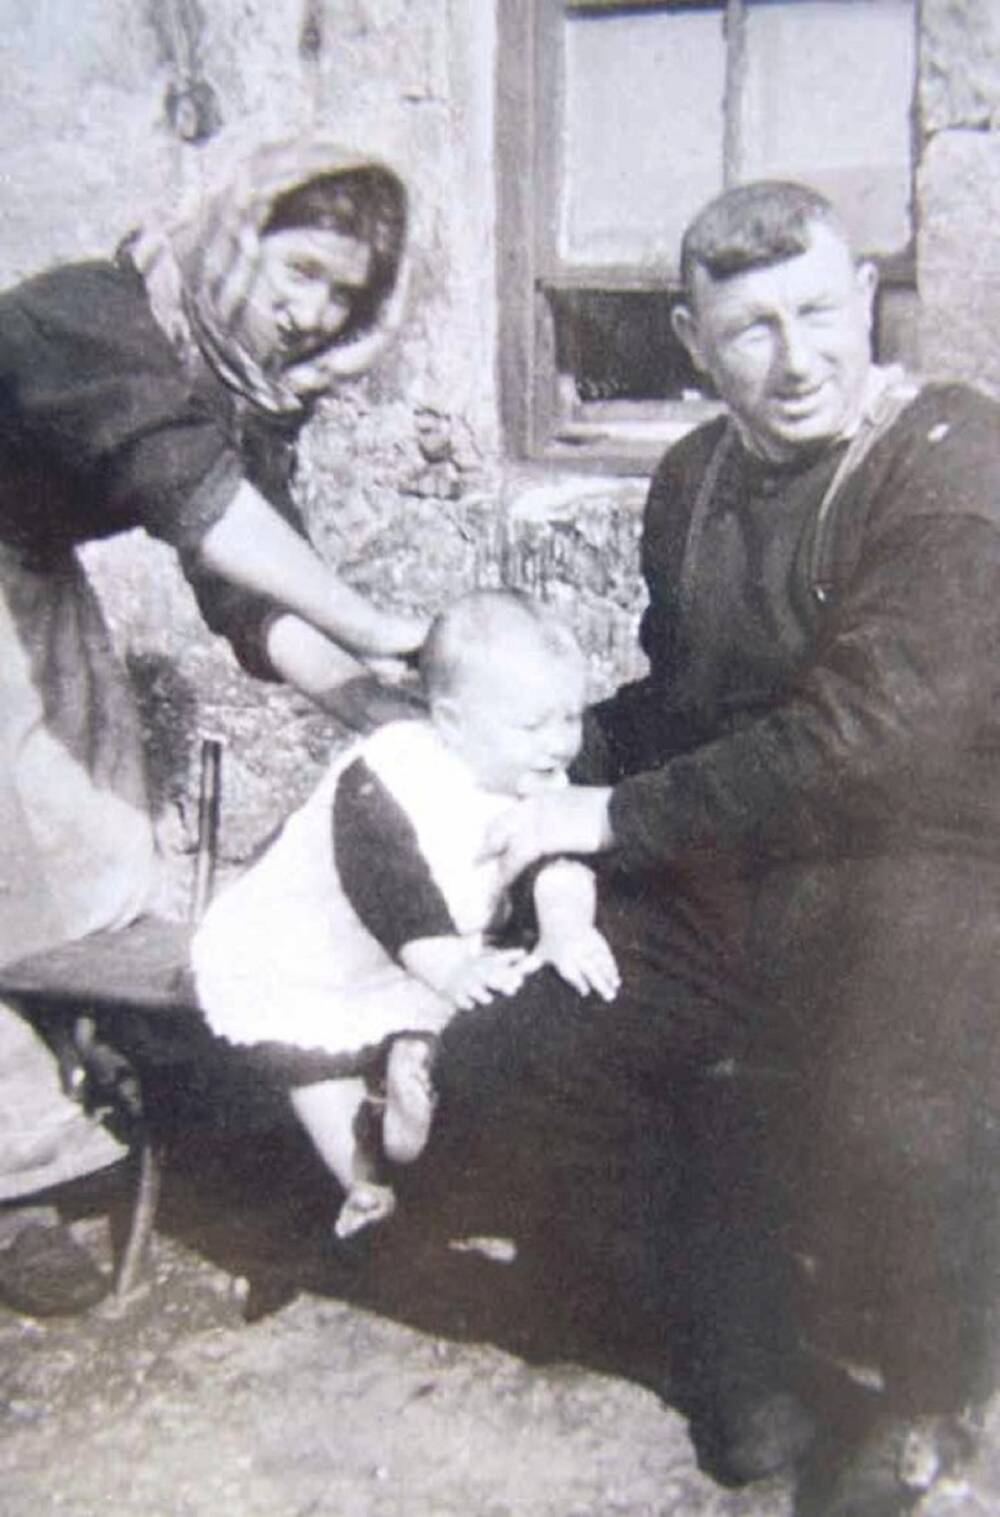 A black and white photograph of a young family sitting on a bench outside a stone cottage. The mother leans over a baby, who is perched on the bench and being held up by his father.